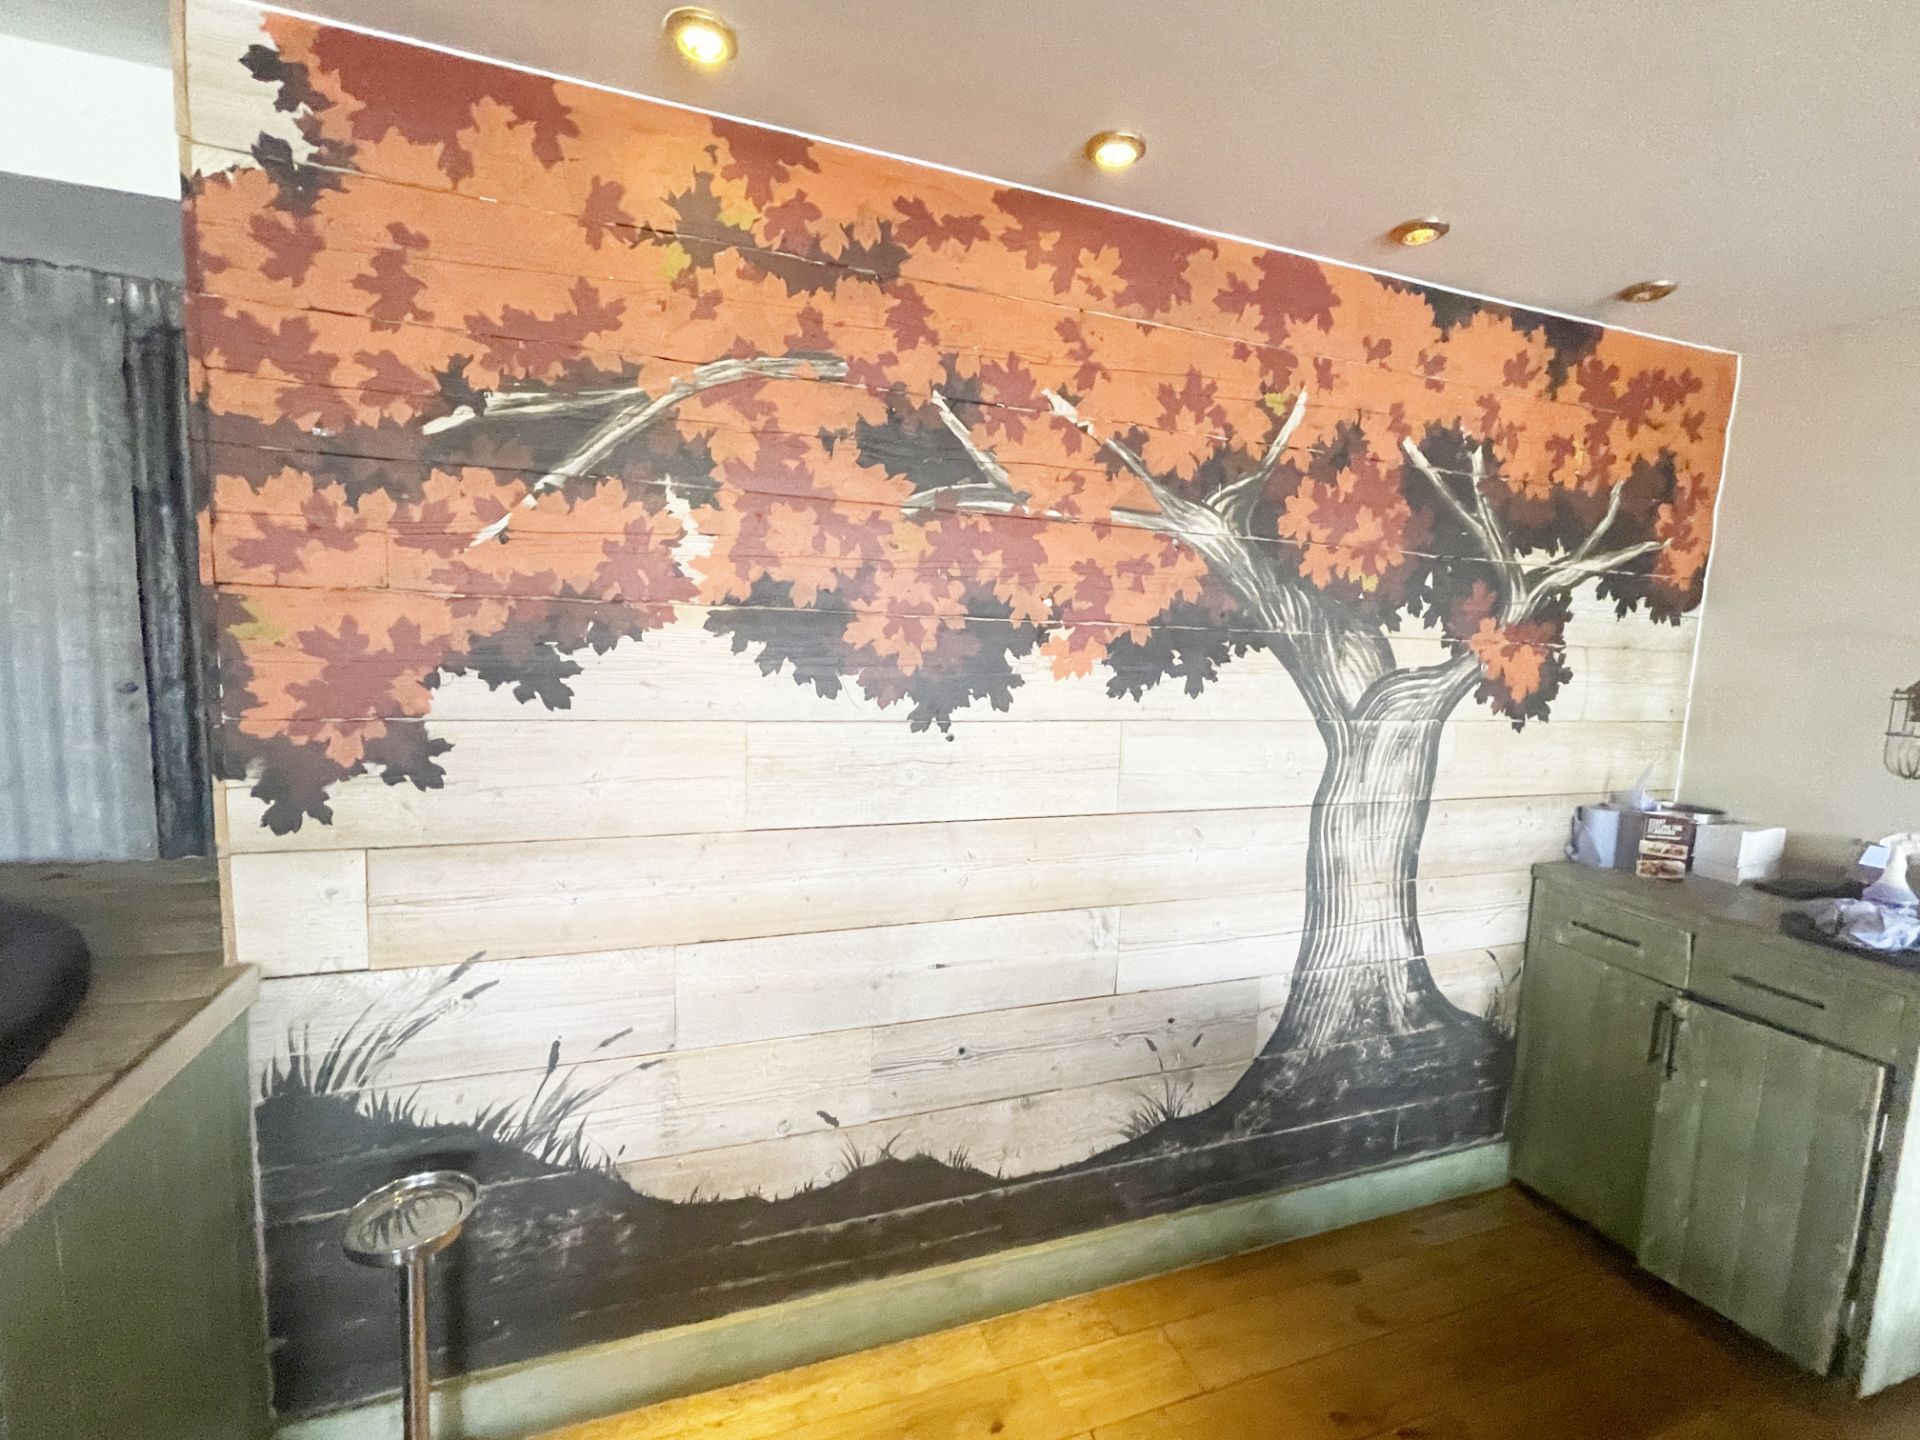 1 x Natural Wood Wall Covering Panels Featuring a Hand Painted Leafy Autumn Tree - Image 2 of 7